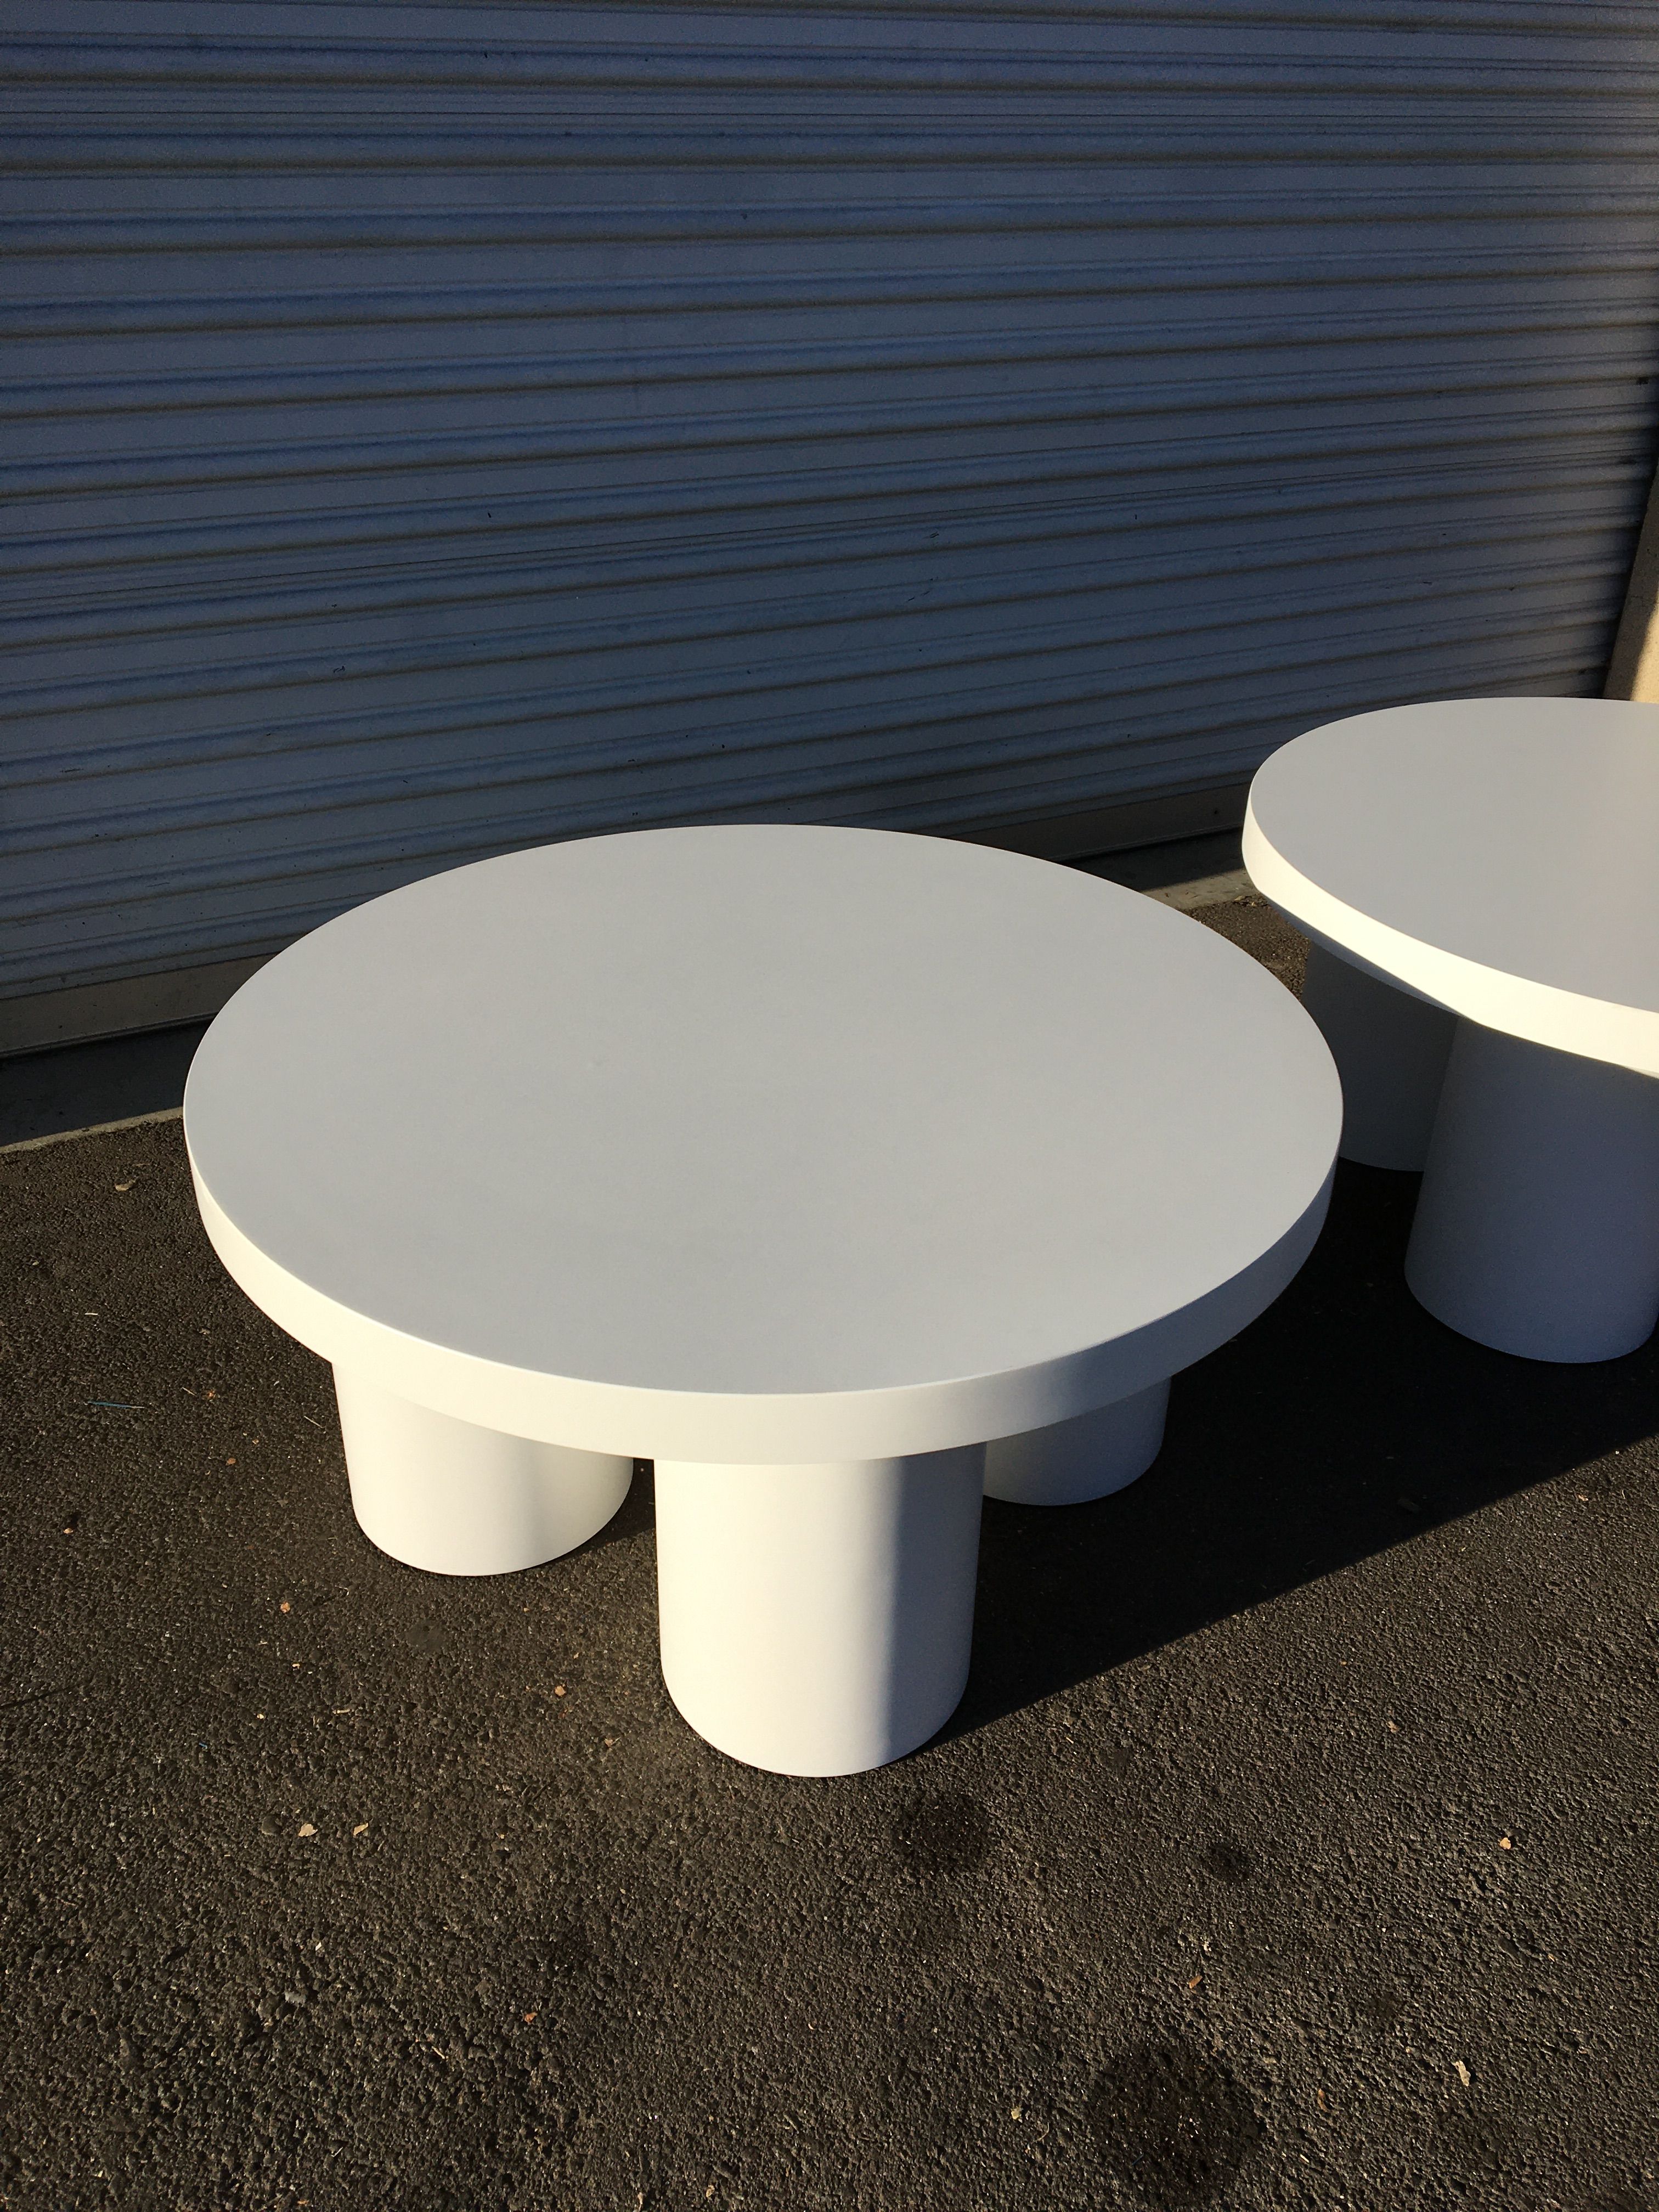  Twin Coffee Table Set product image 2